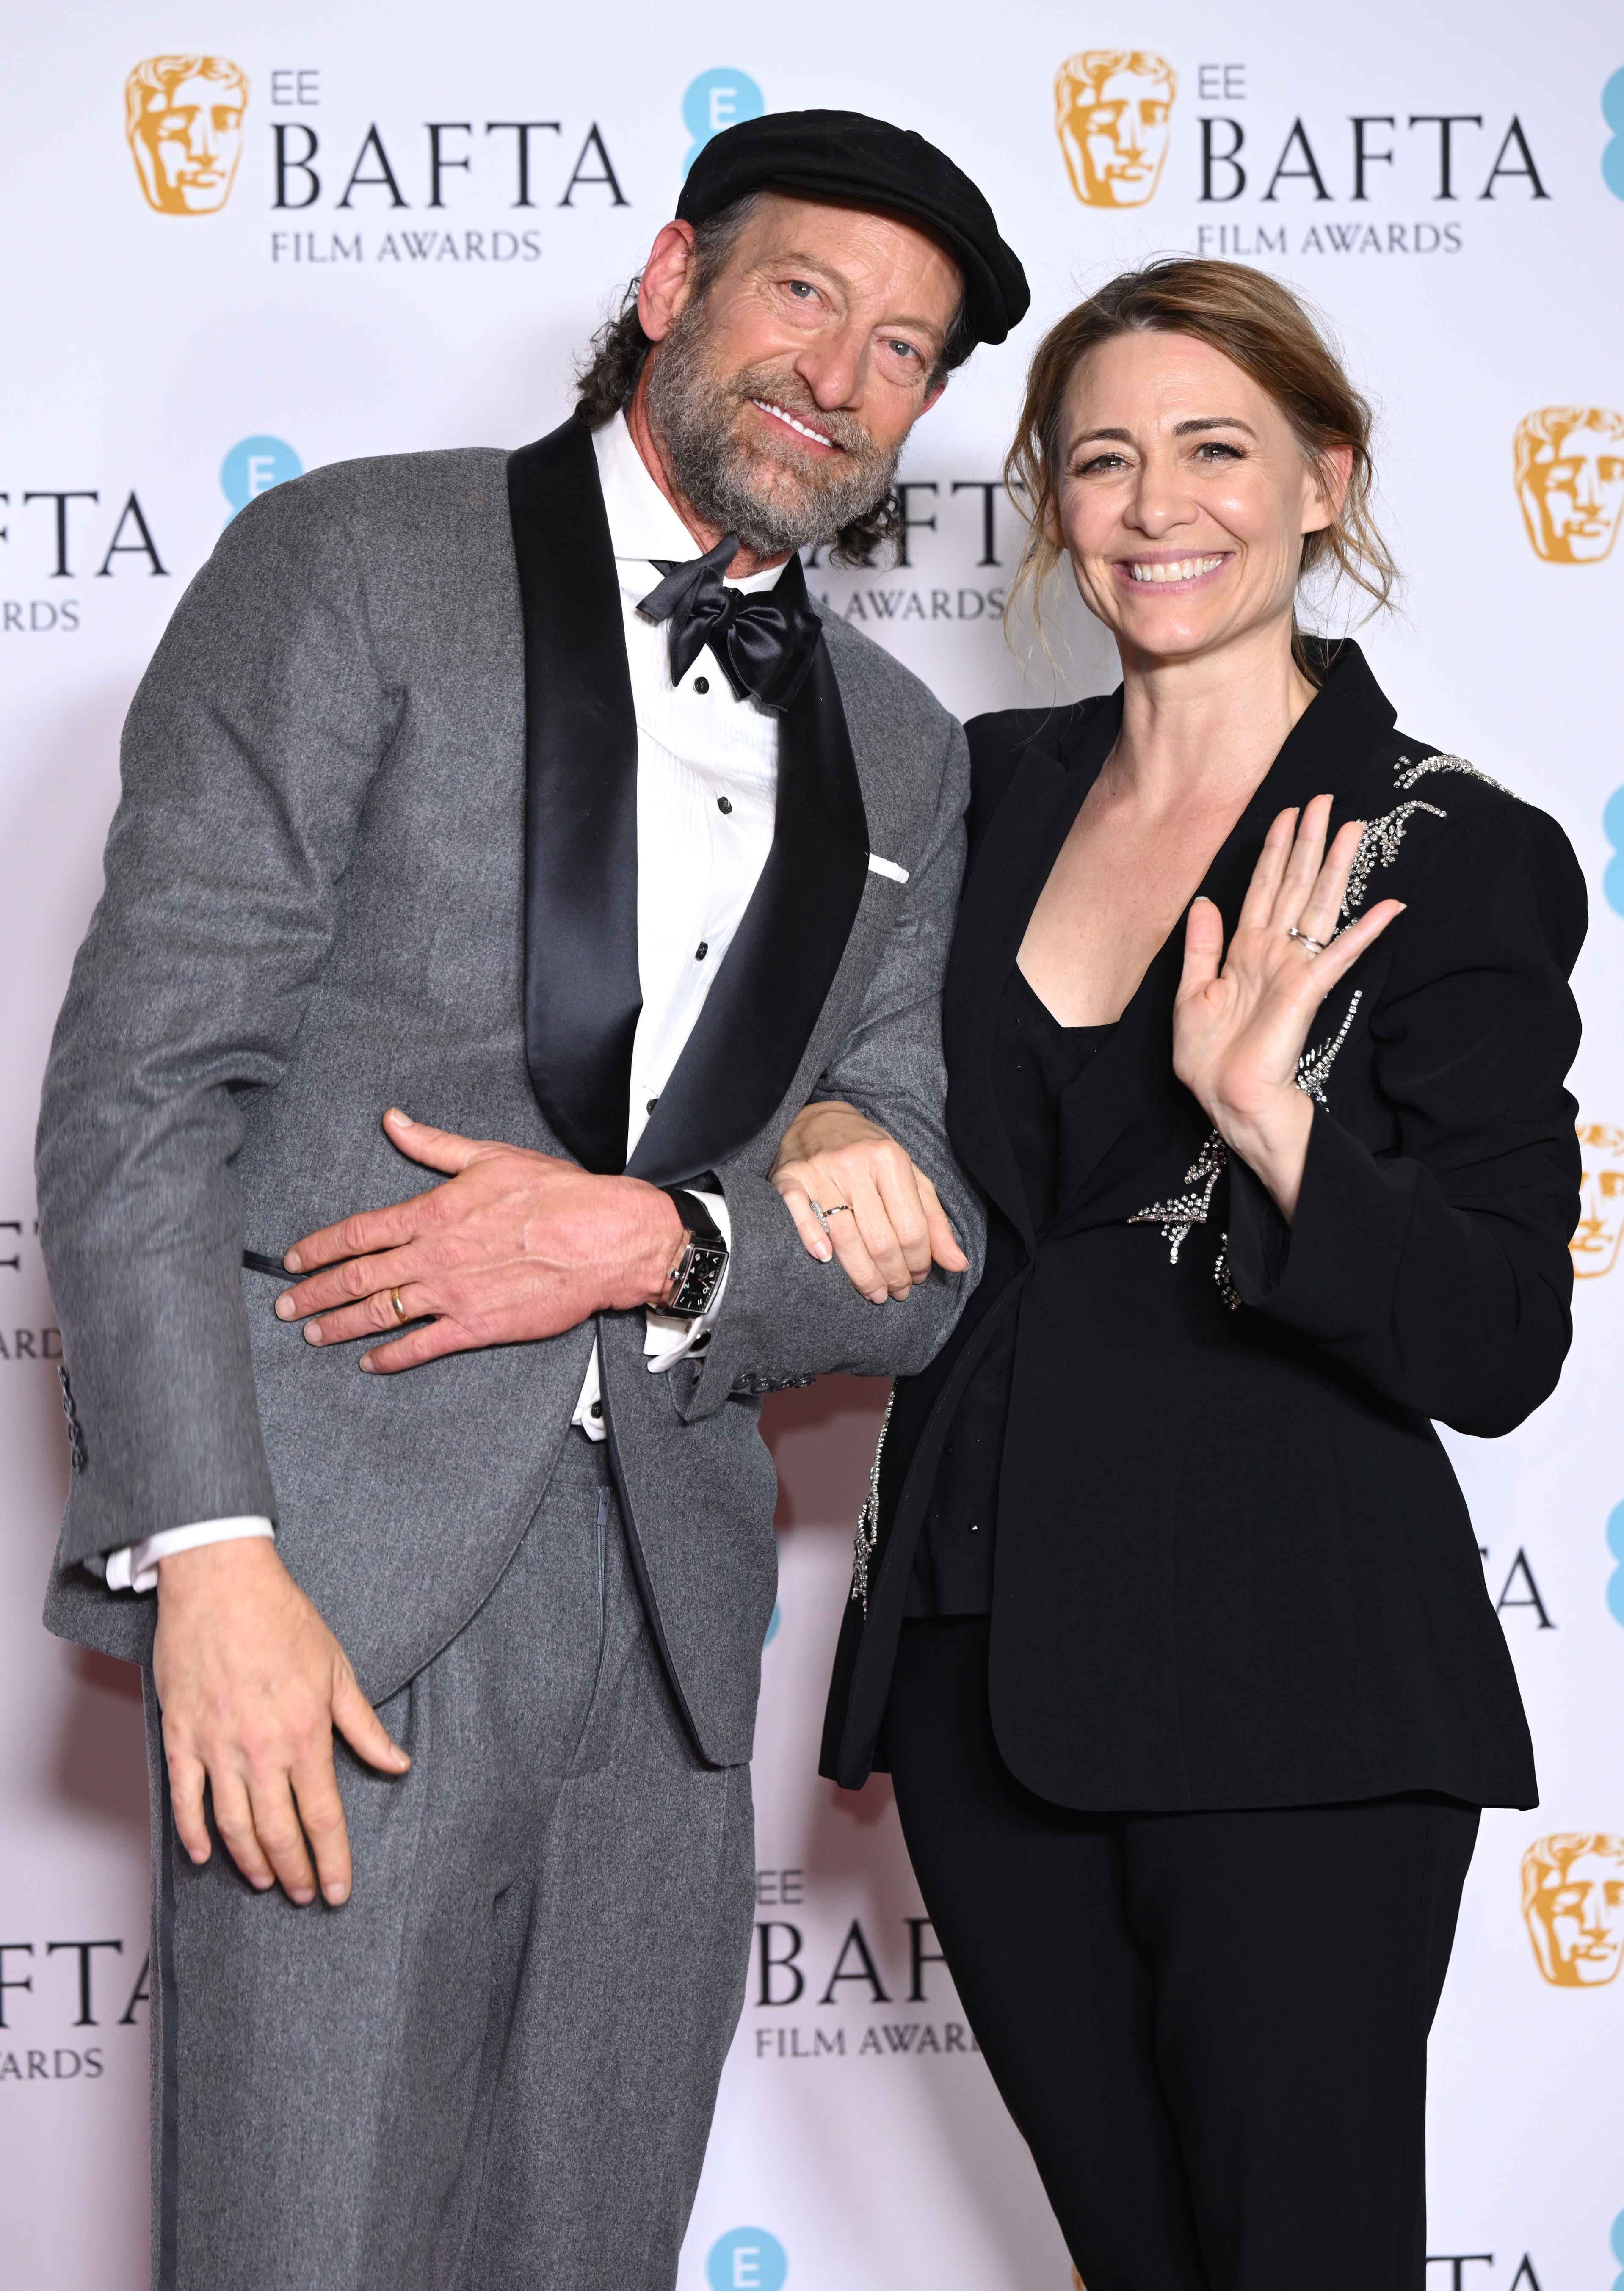 Troy Kotsur and Deanne Bray at the EE BAFTA Film Awards 2023 on February 19, 2023, in London, England. | Source: Getty Images